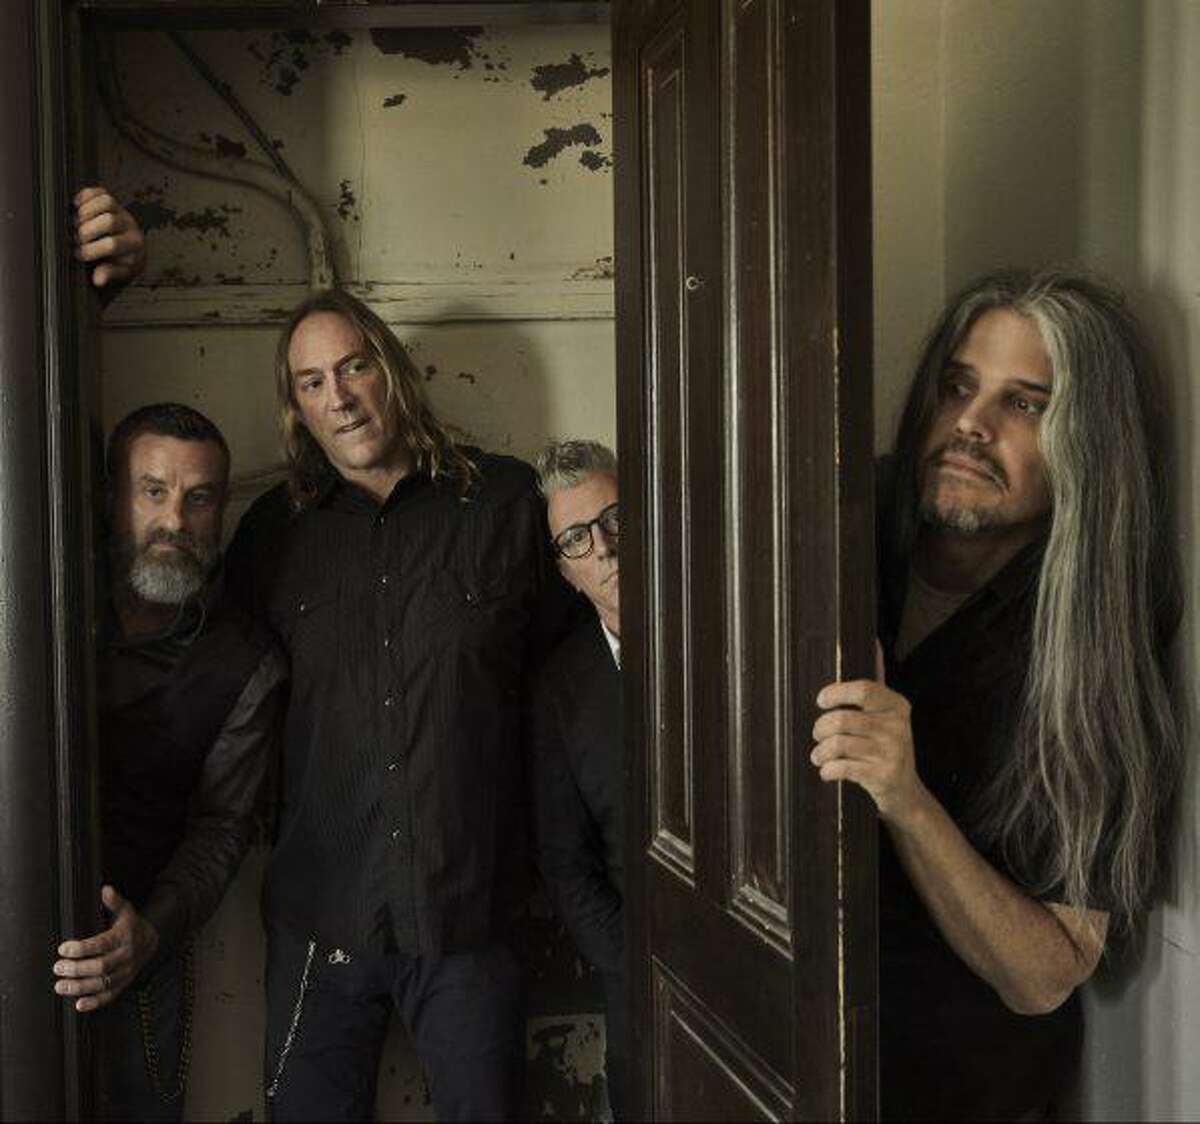 Tool: The prog-metal band's long-awaited new album, "Fear Inoculum," received rave reviews. The album's sprawling, complex songs are likely to join fan favorites such as "Schism" and "Vicarious" on the band's set list. 7:30 p.m. Friday, AT&T Center, 1 AT&T Center Parkway at East Houston Street. Sold out (some verified resale tickets available). attcenter.com — Jim Kiest